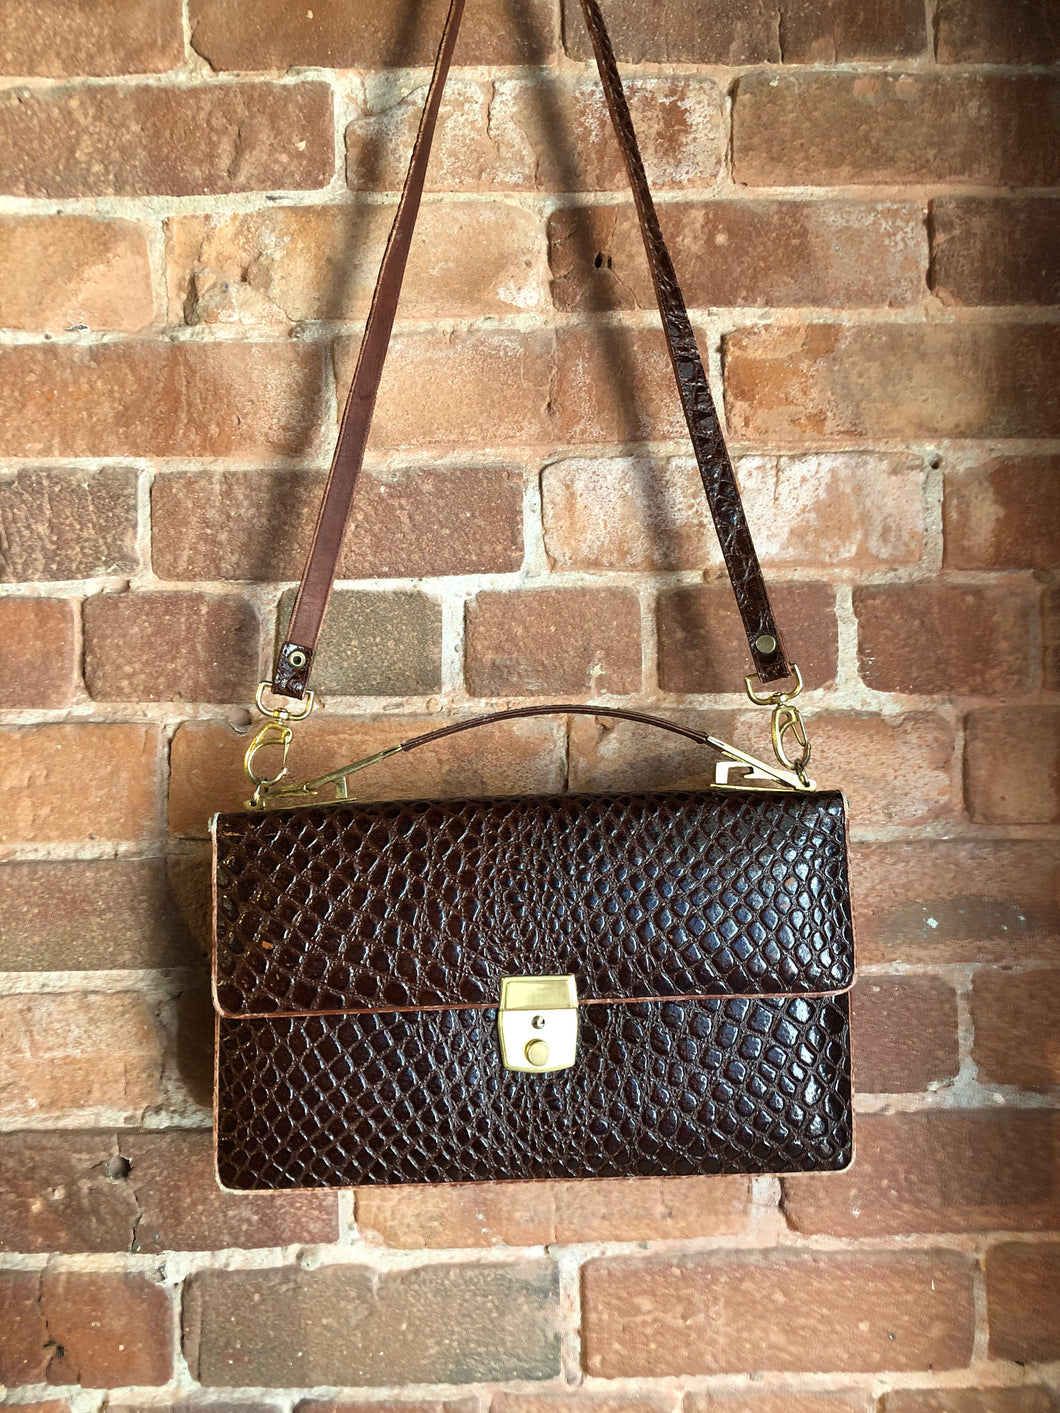 Kingspier Vintage - Dark brown reptile handbag with top handle, brass hardware, push button front clasp, detachable shoulder strap, inside pockets and leather lining.